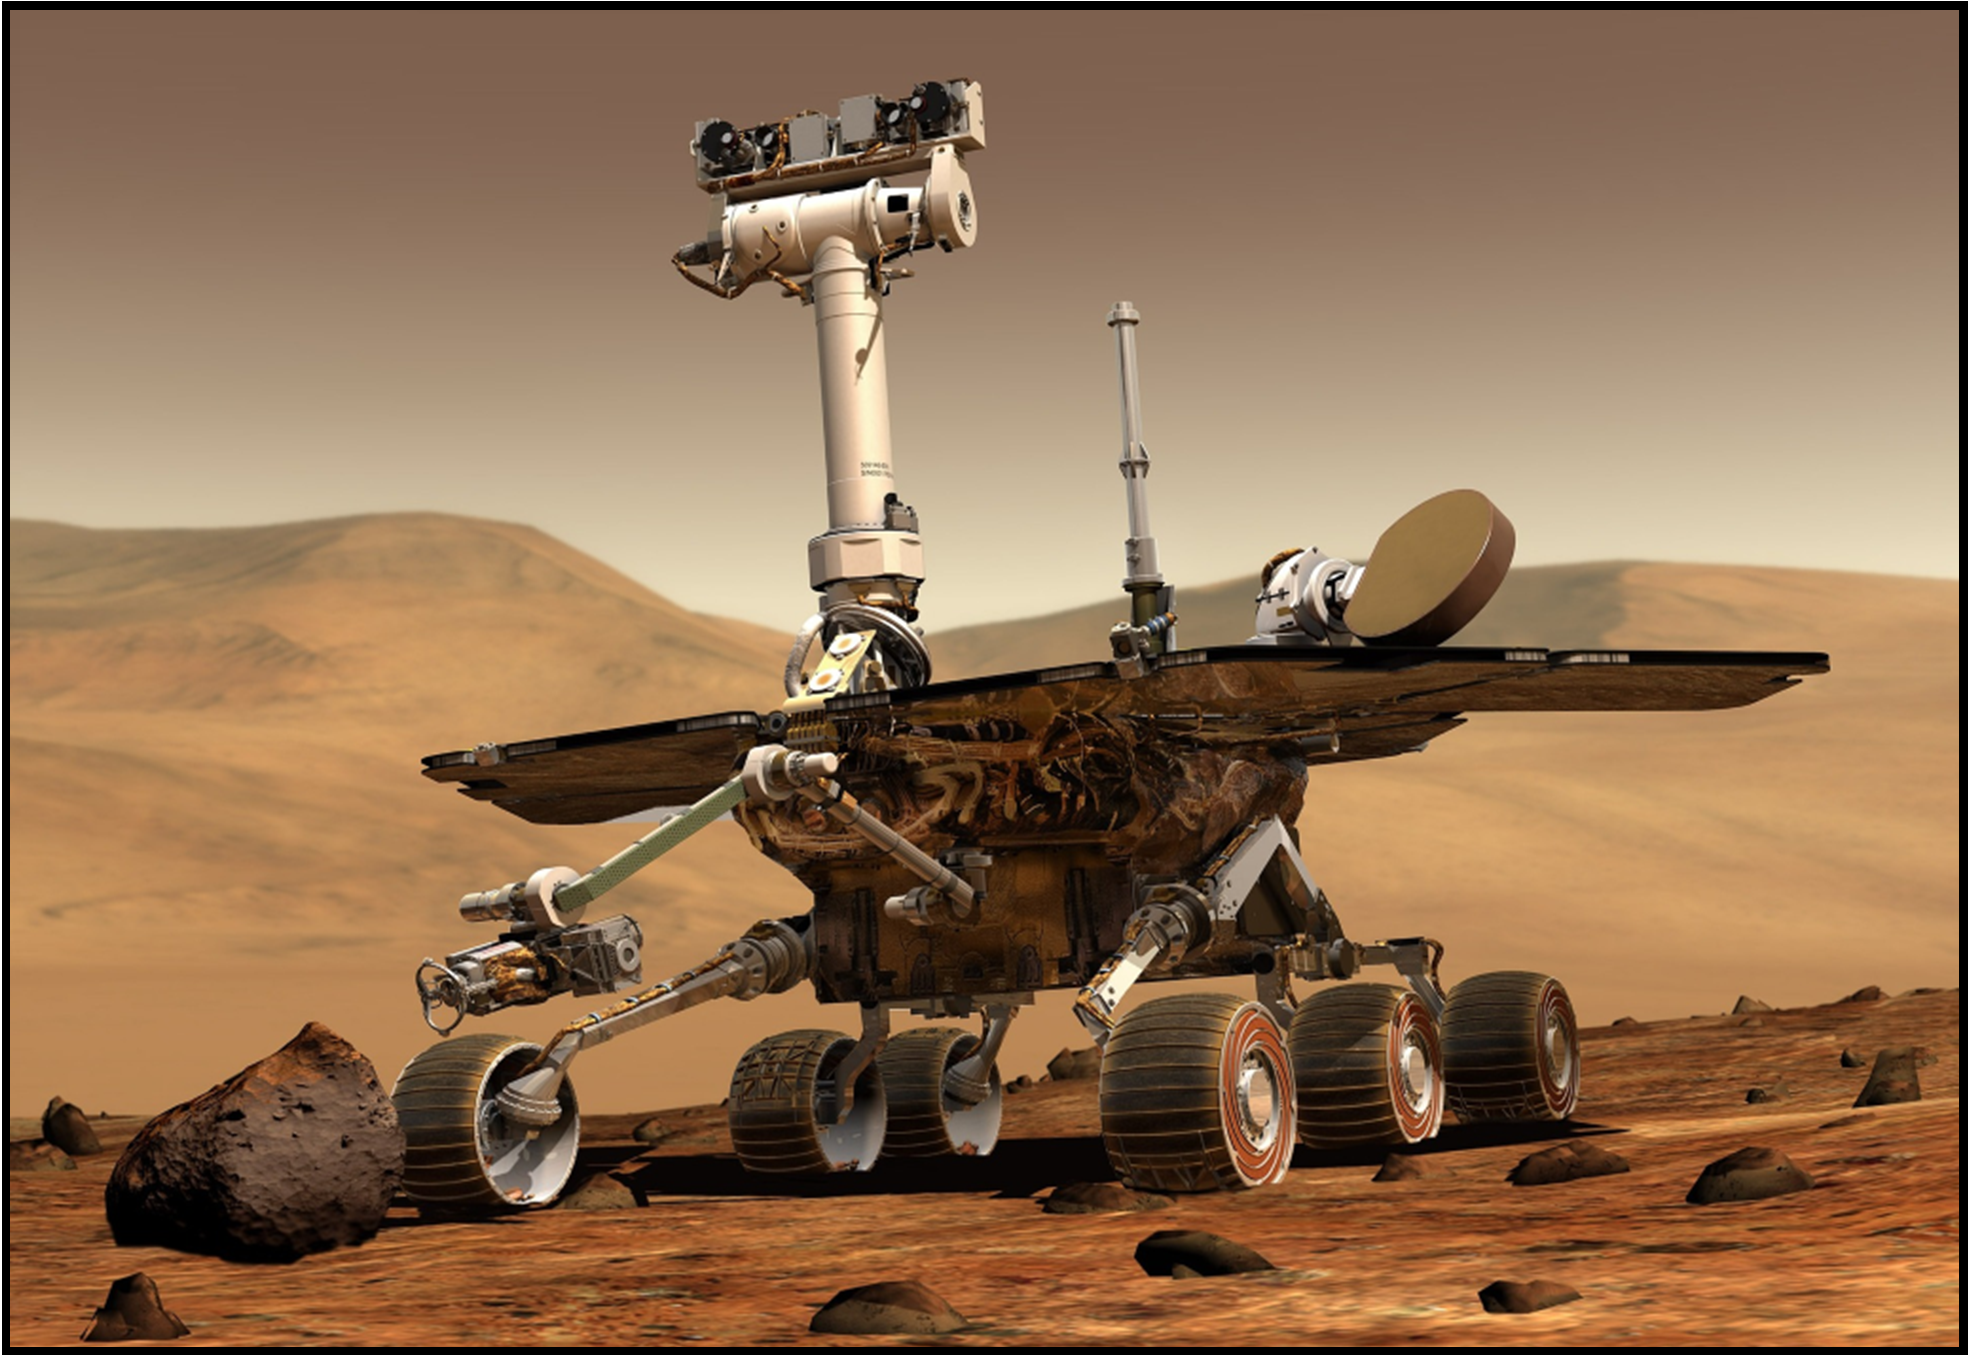 Mars Rover pic